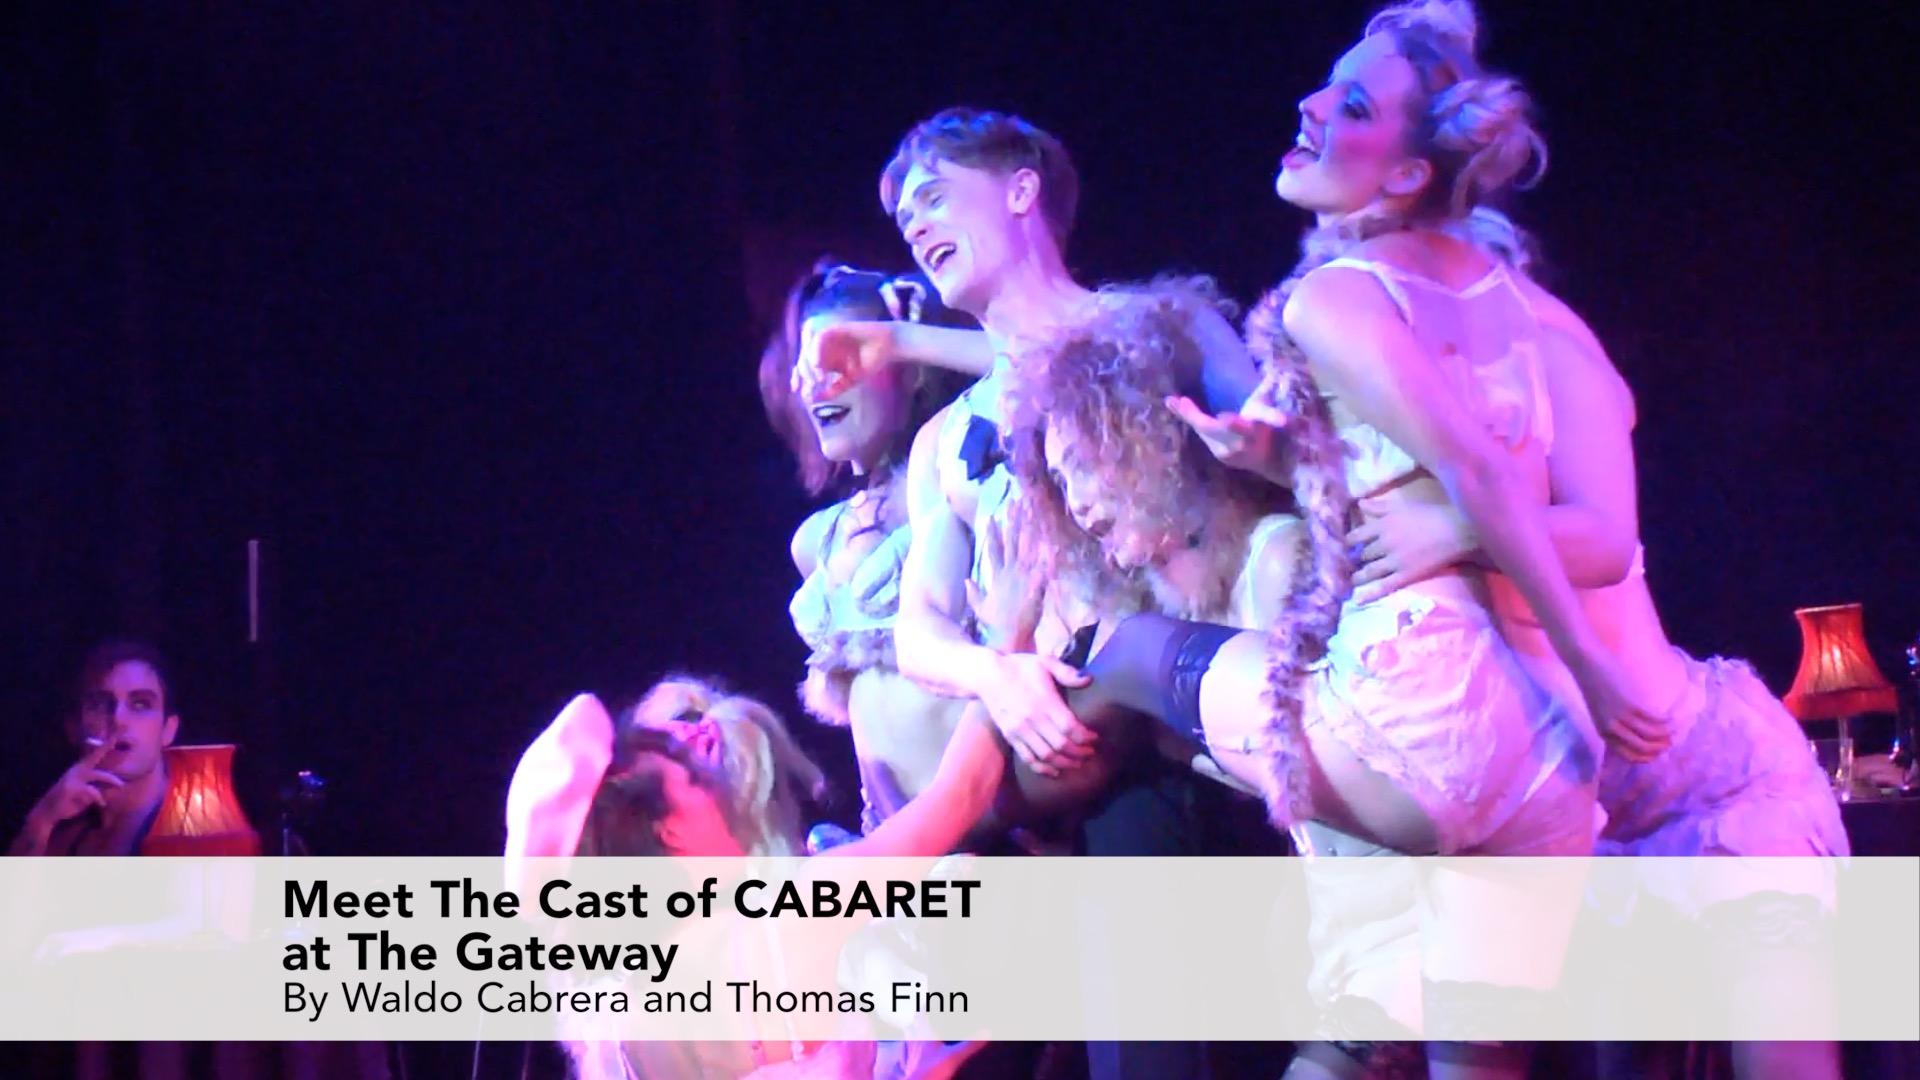 Meet The Cast of Cabaret at The Gateway